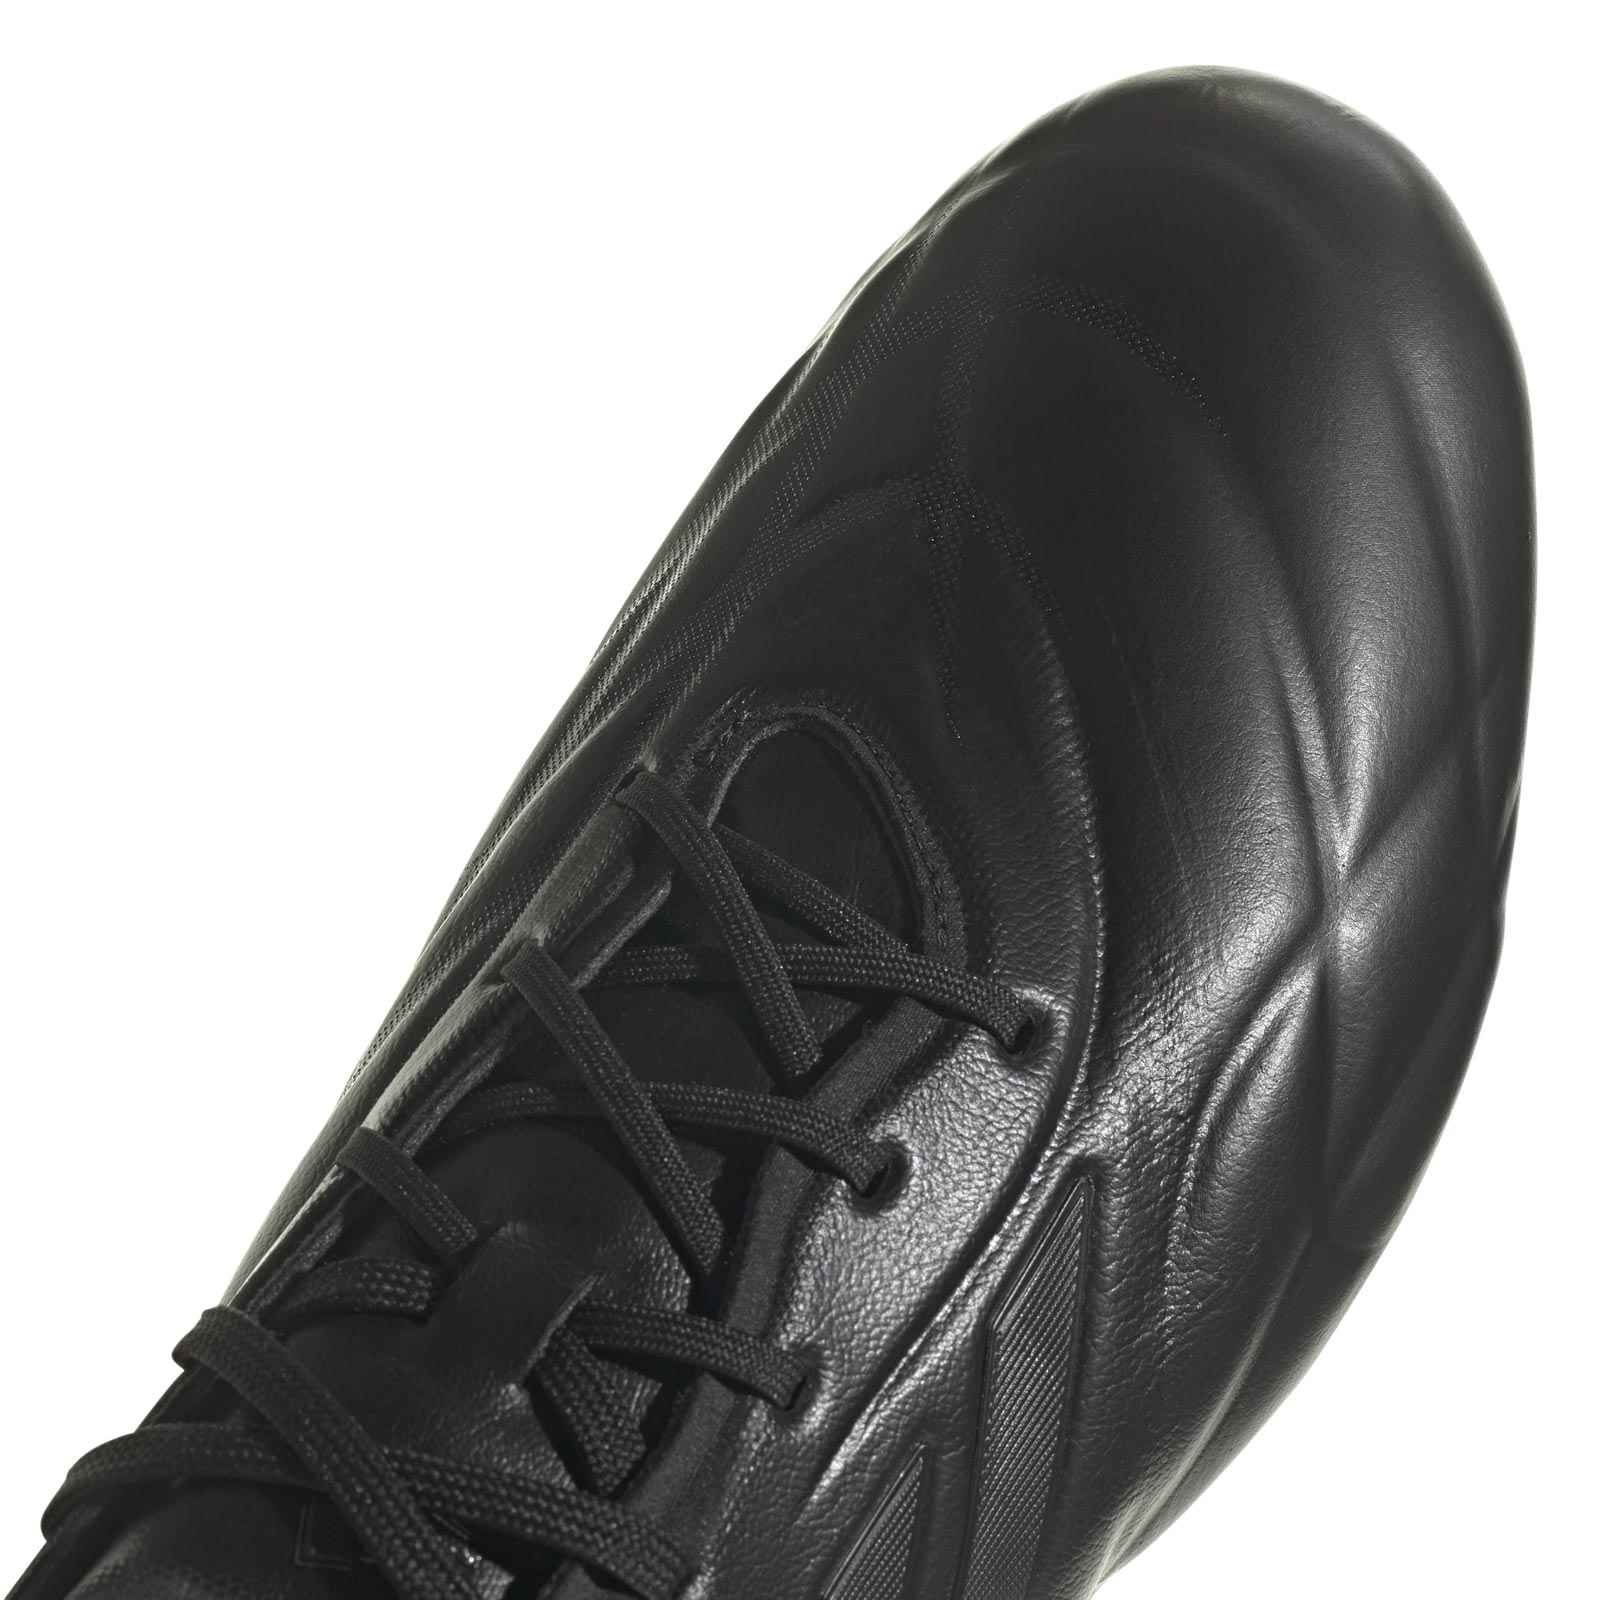 Adidas Copa Pure.1 Firm Ground Boots